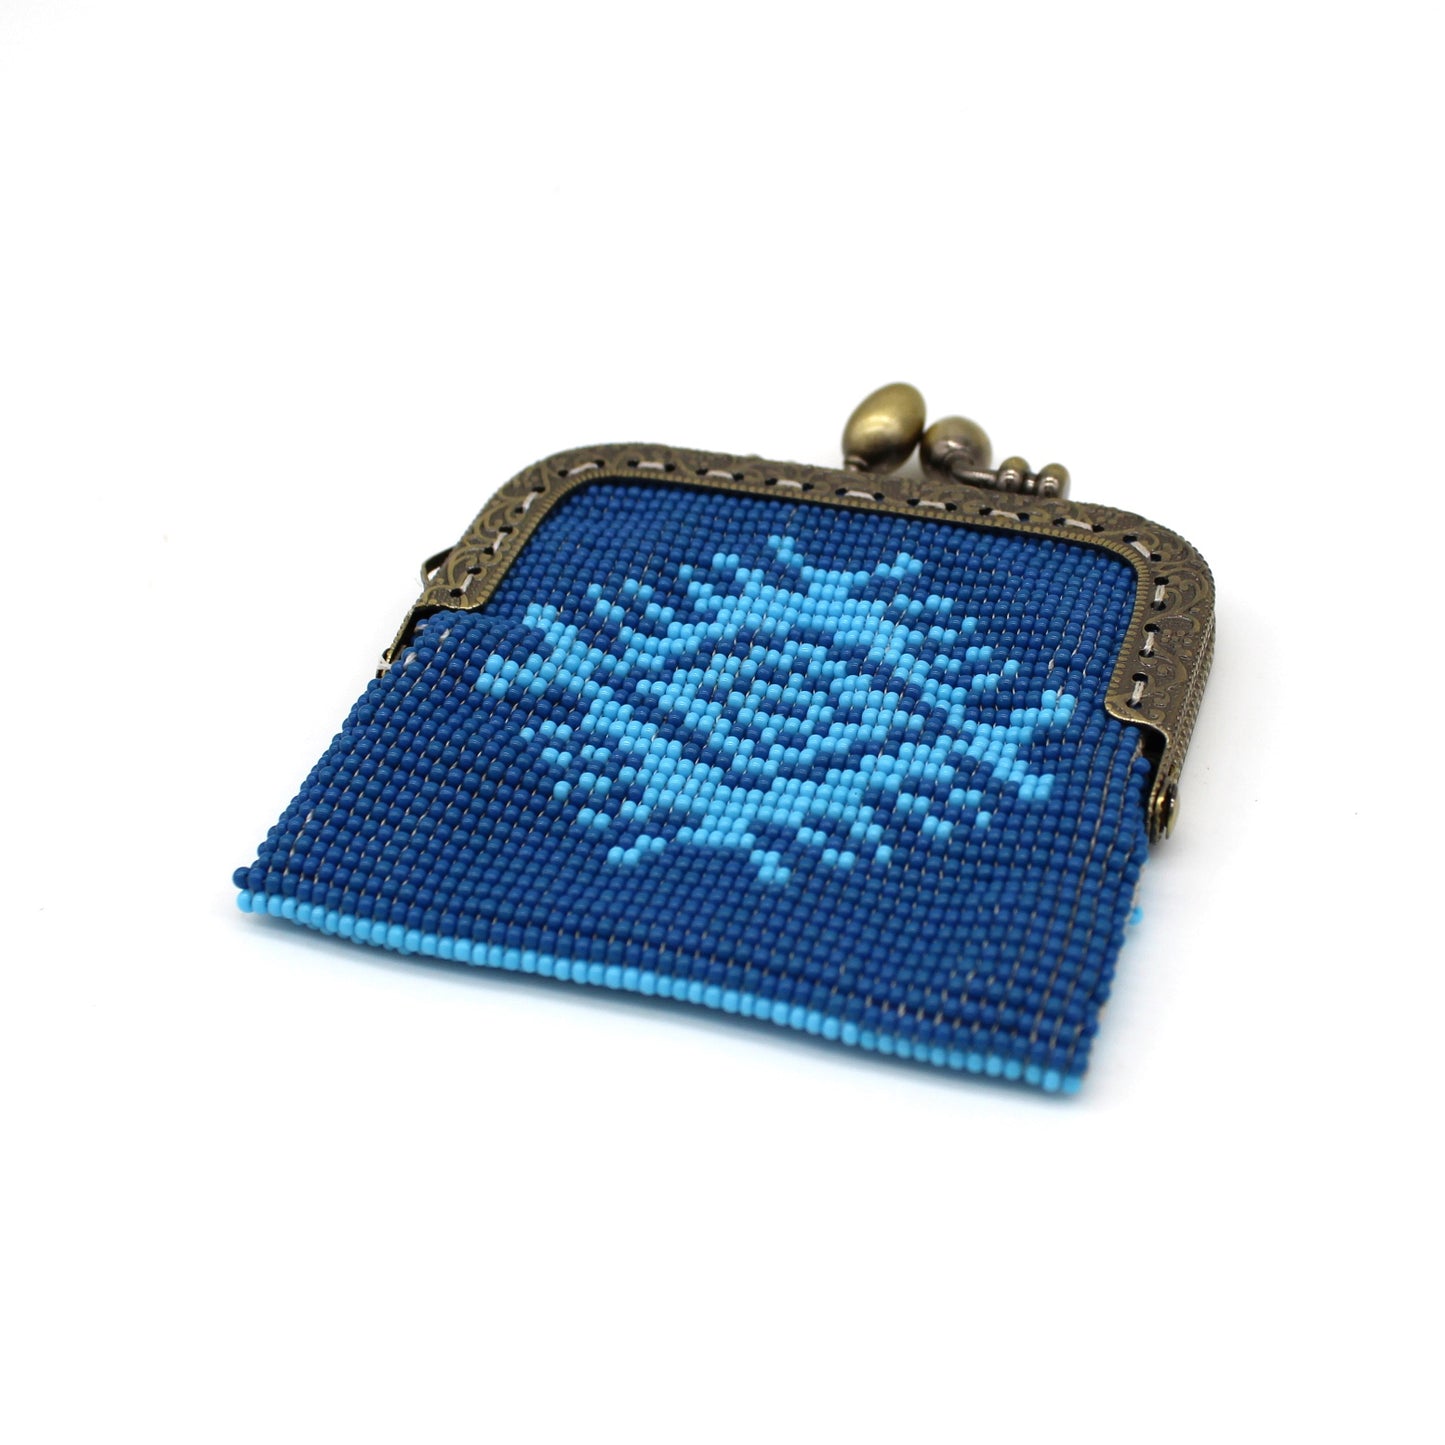 Glass bead coin purse with metal frame - Blue Eye